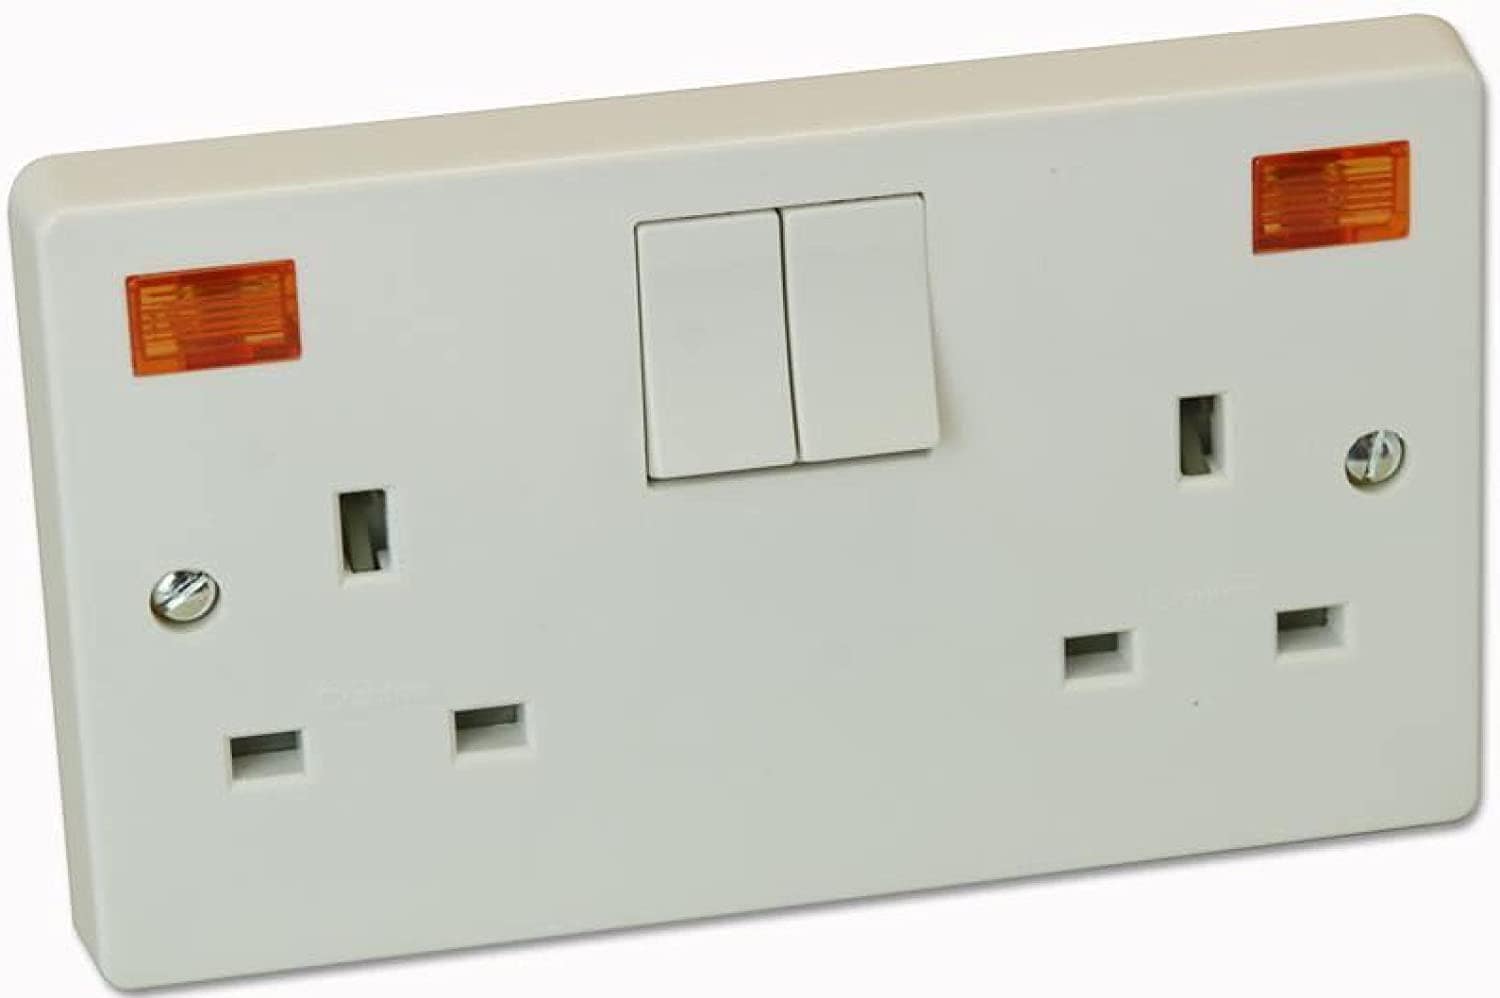 Crabtree 13A 2 Gang Double Pole Switched Socket with Neon | Supply Master | Accra, Ghana Switches & Sockets Buy Tools hardware Building materials